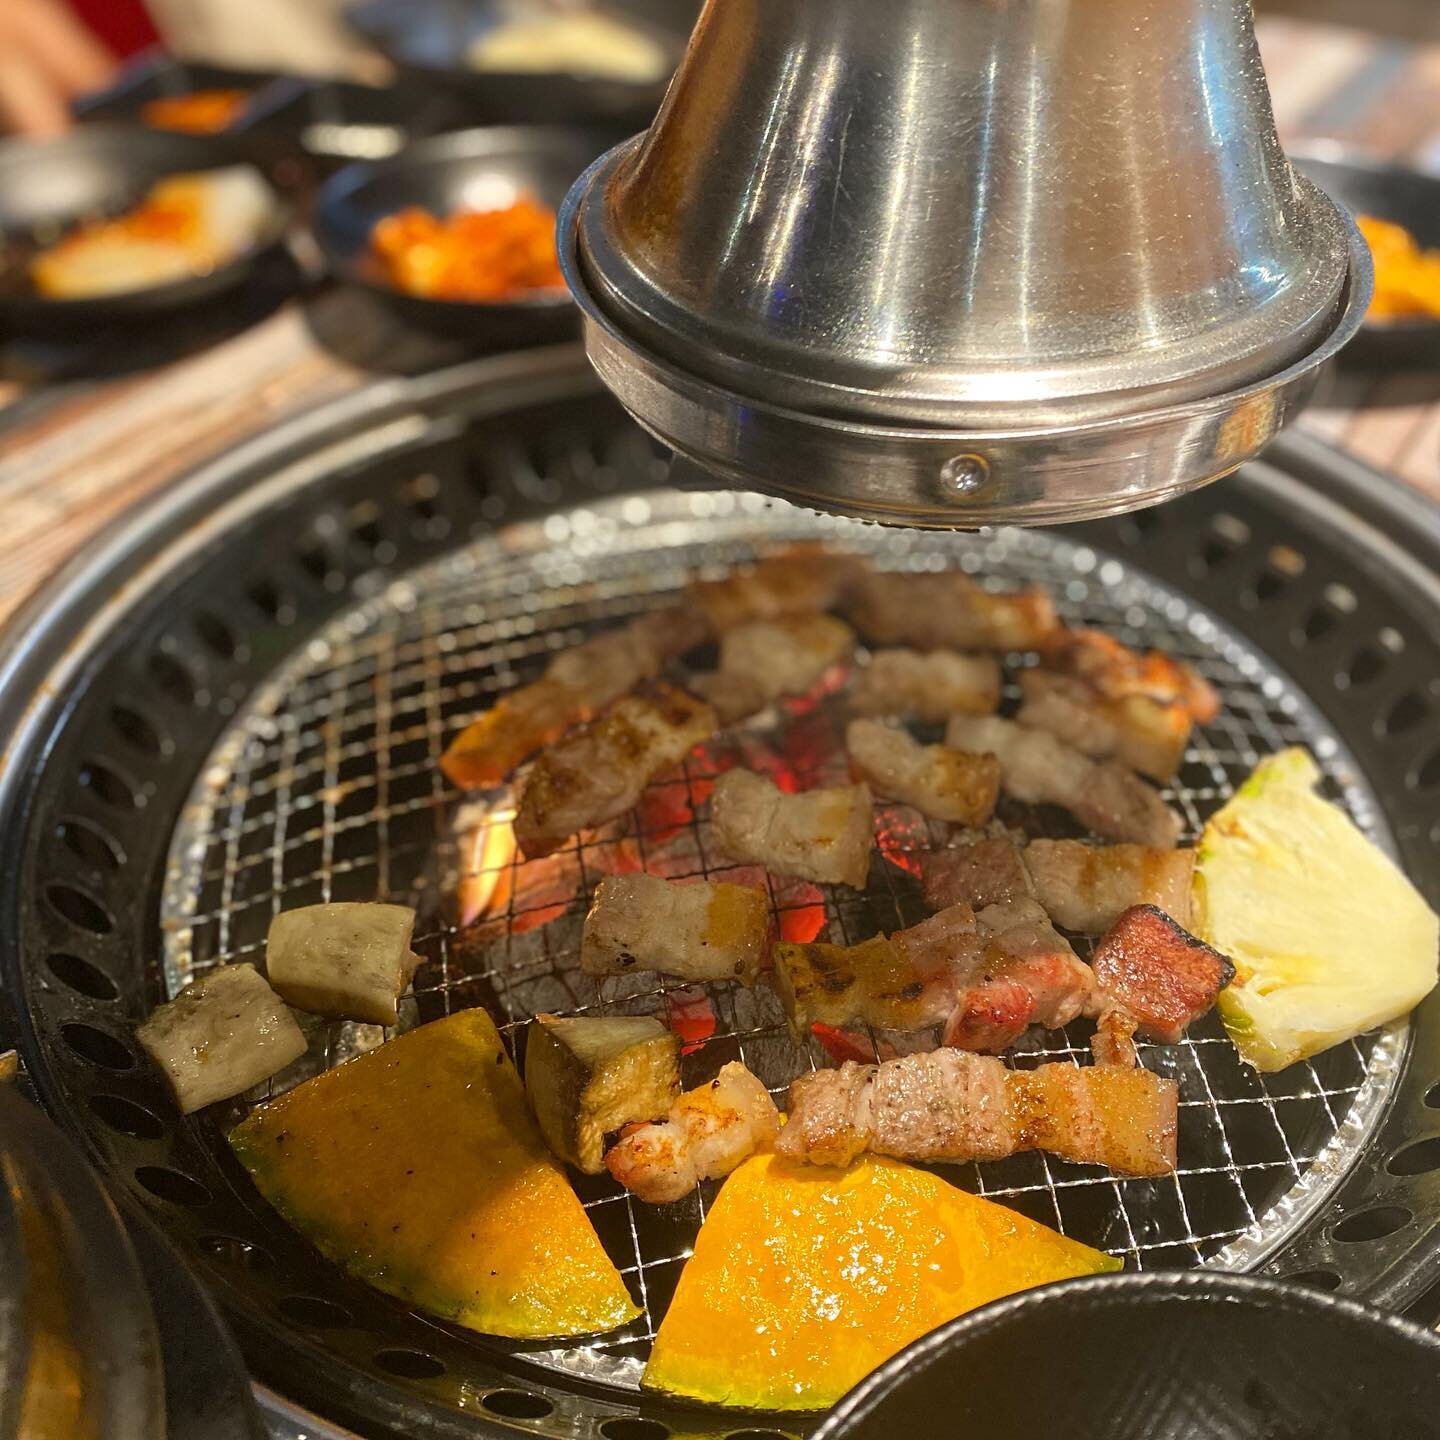 Samgyeopsal is a popular
Korean dish that is commonly served
as an evening meal😋

It consists of thick, fatty 
slices of pork belly meat. 

Come with your friends
who are meat lovers!💛 

🥩Mooink Premium BBQ🥩

👉Open 7 days | MON - FRI 5pm - 10pm
